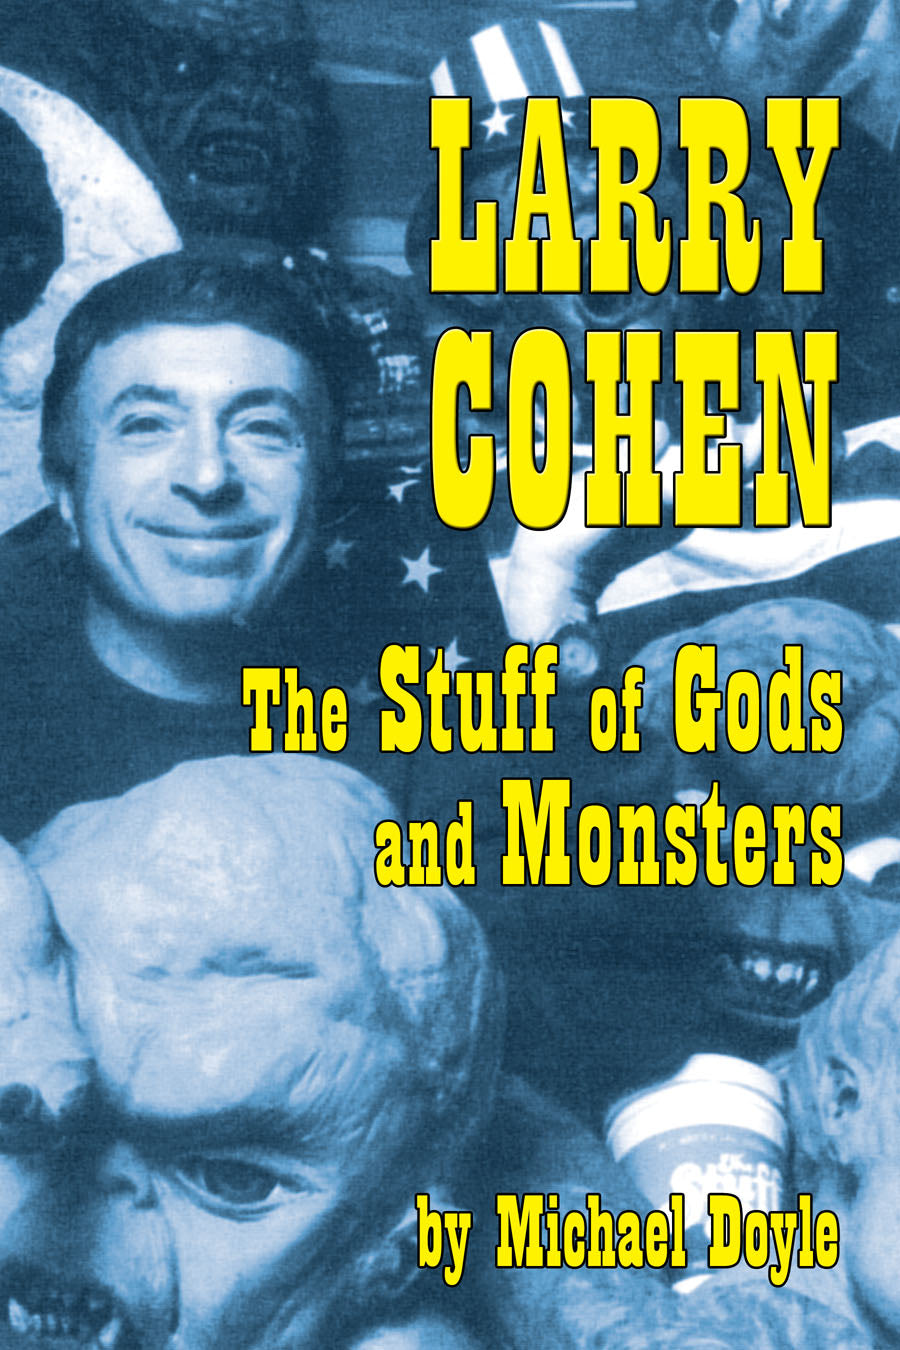 LARRY COHEN: THE STUFF OF GODS AND MONSTERS (HARDCOVER EDITION) by Michael Doyle - BearManor Manor